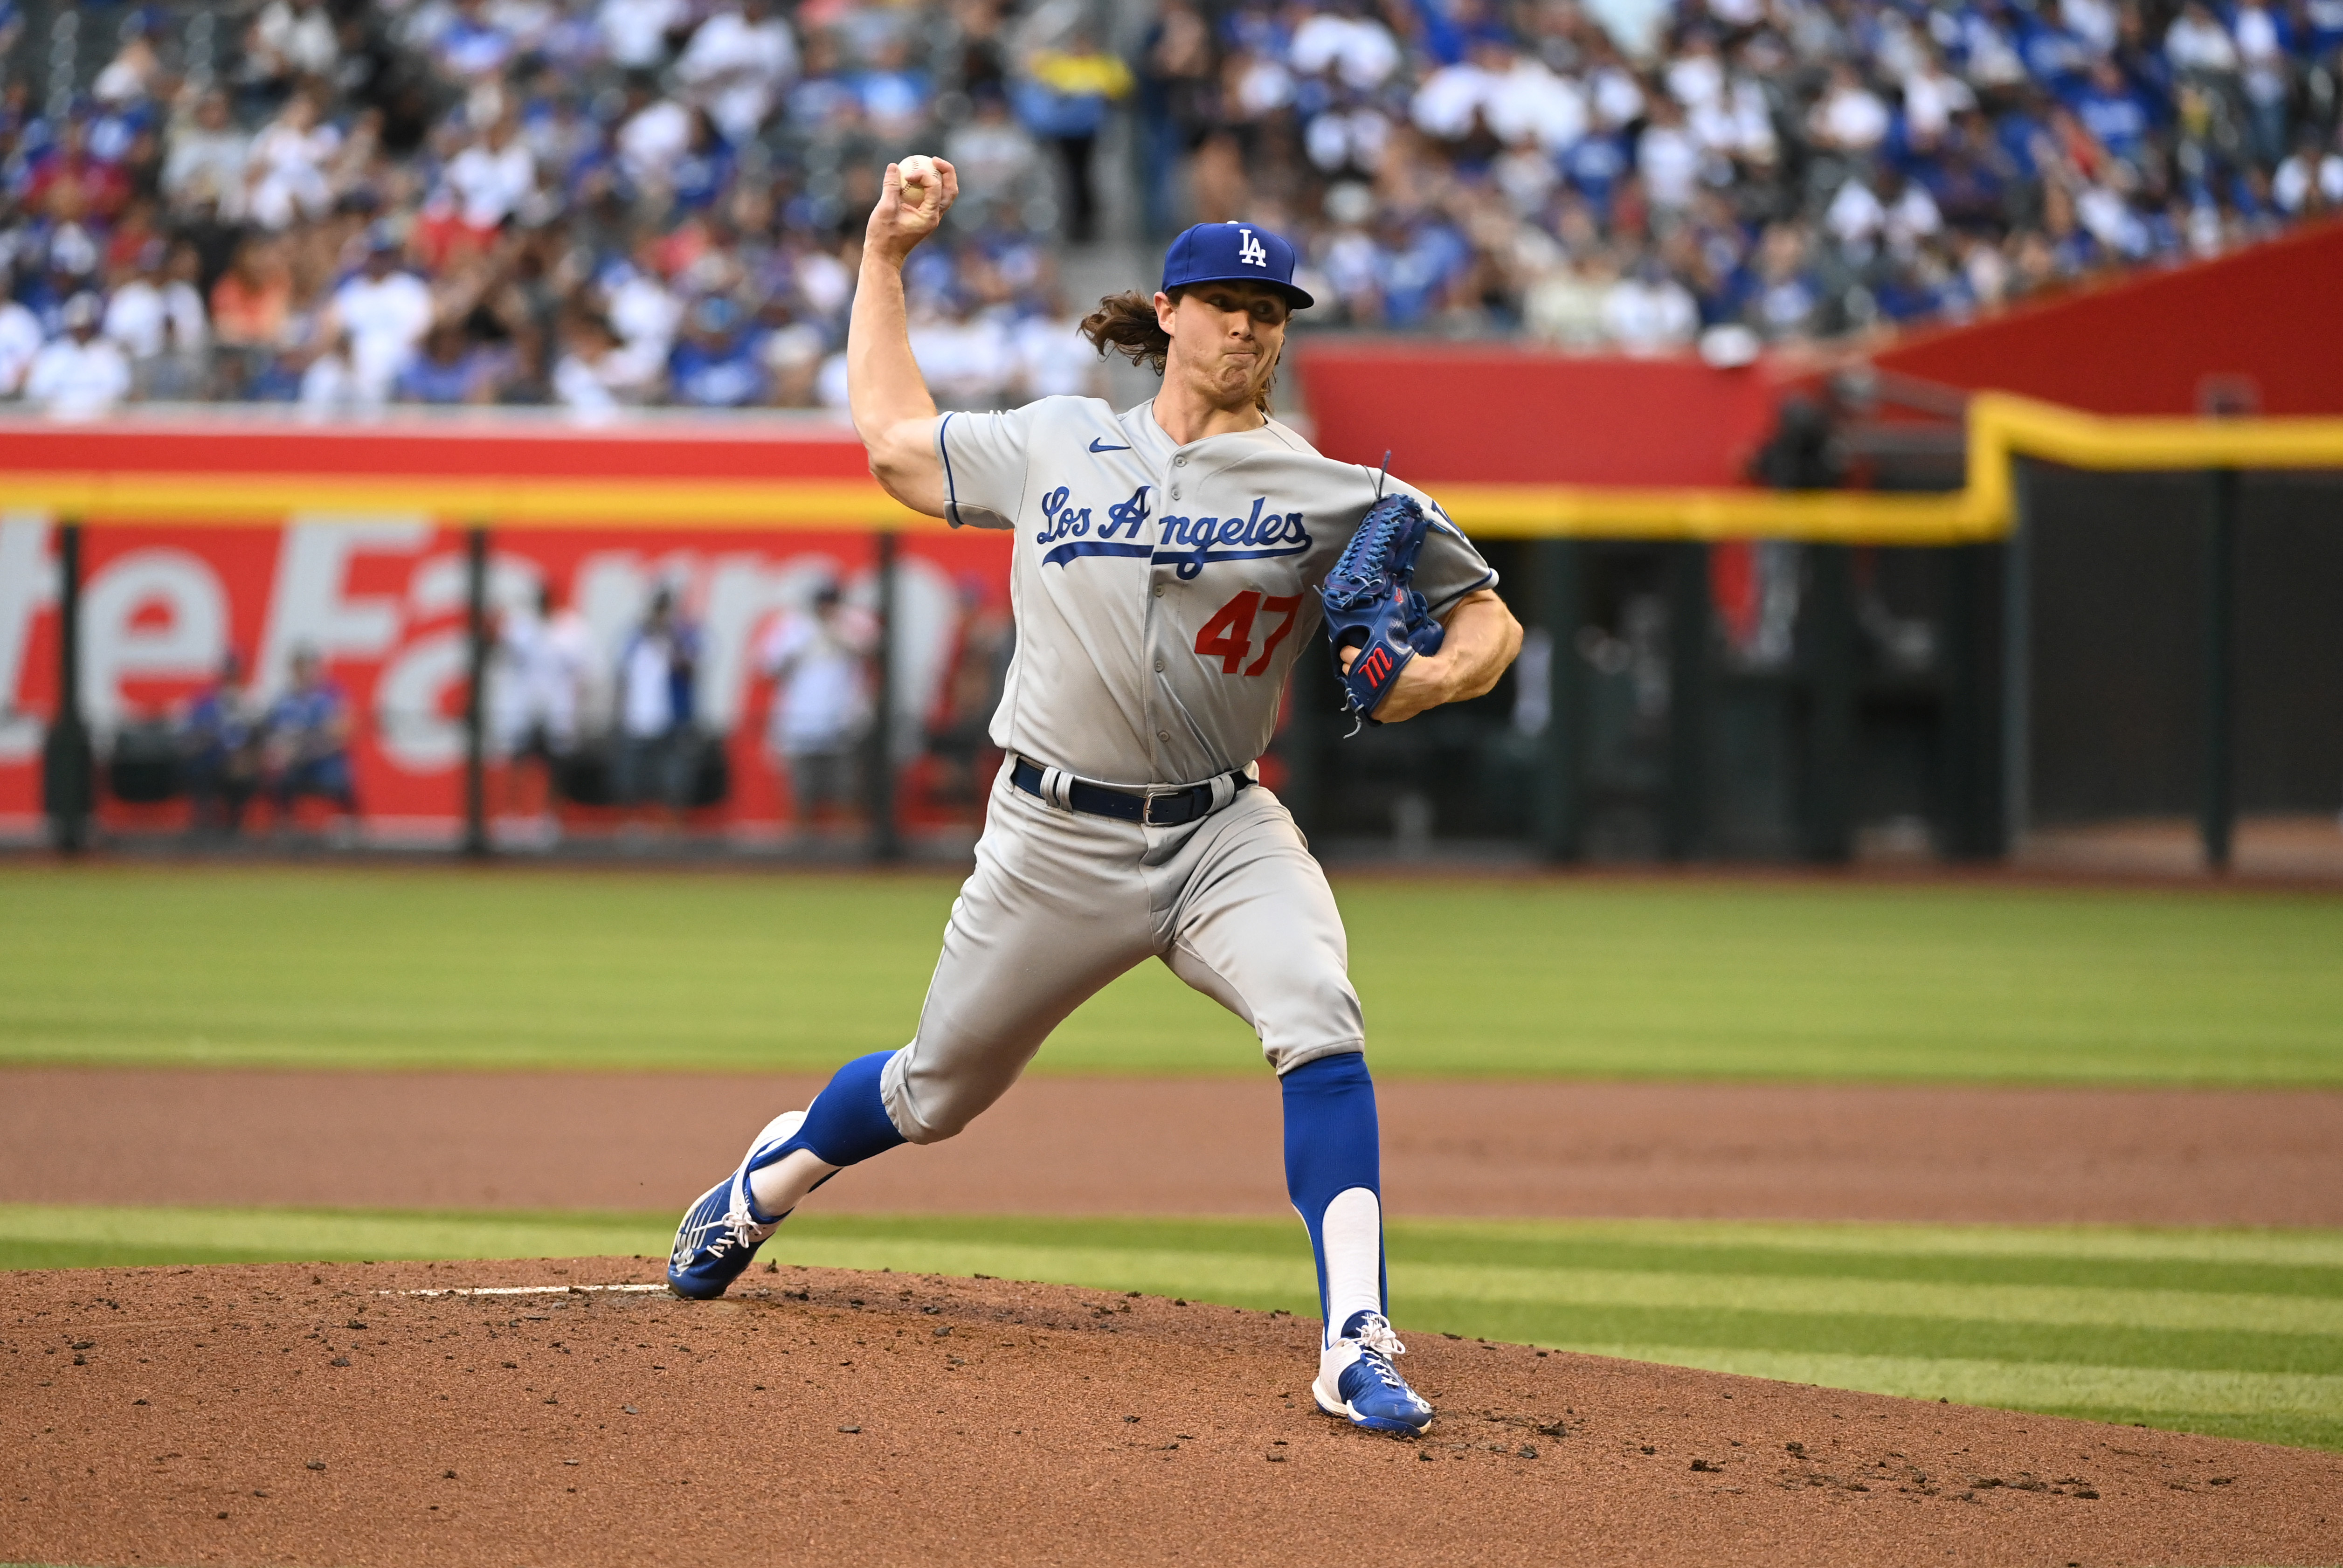 Diego Cartaya is listed in Double AA. : r/Dodgers